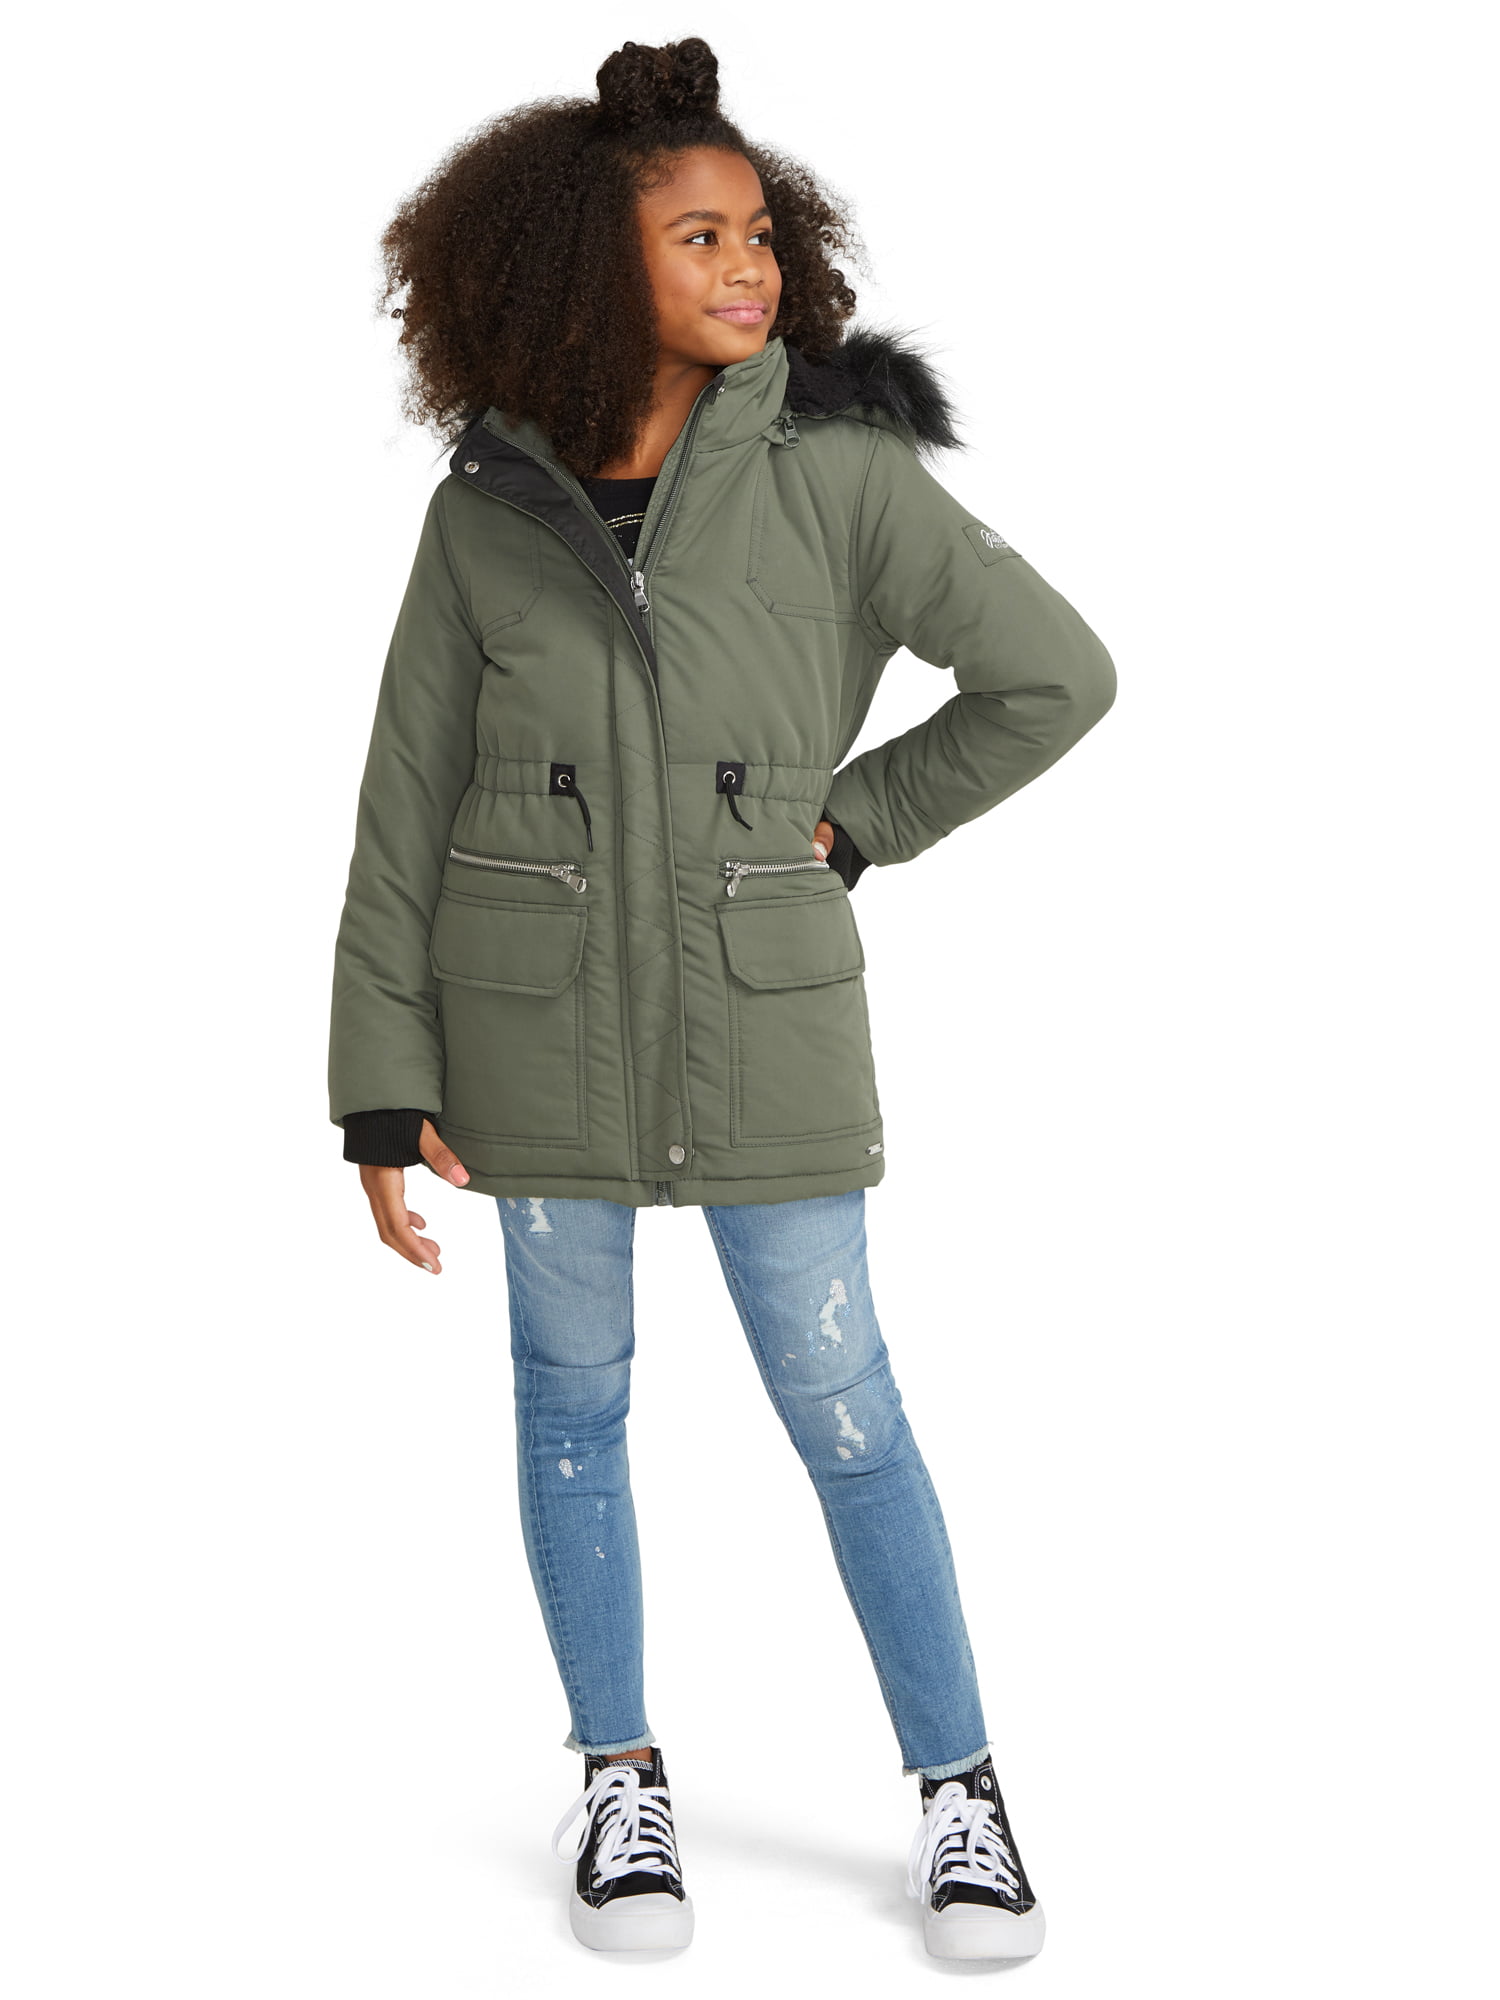 Pile-Lined Faux Canvas Water-Resistant Girls 5-18 with Fur Parka Justice Hood, Jacket Sizes